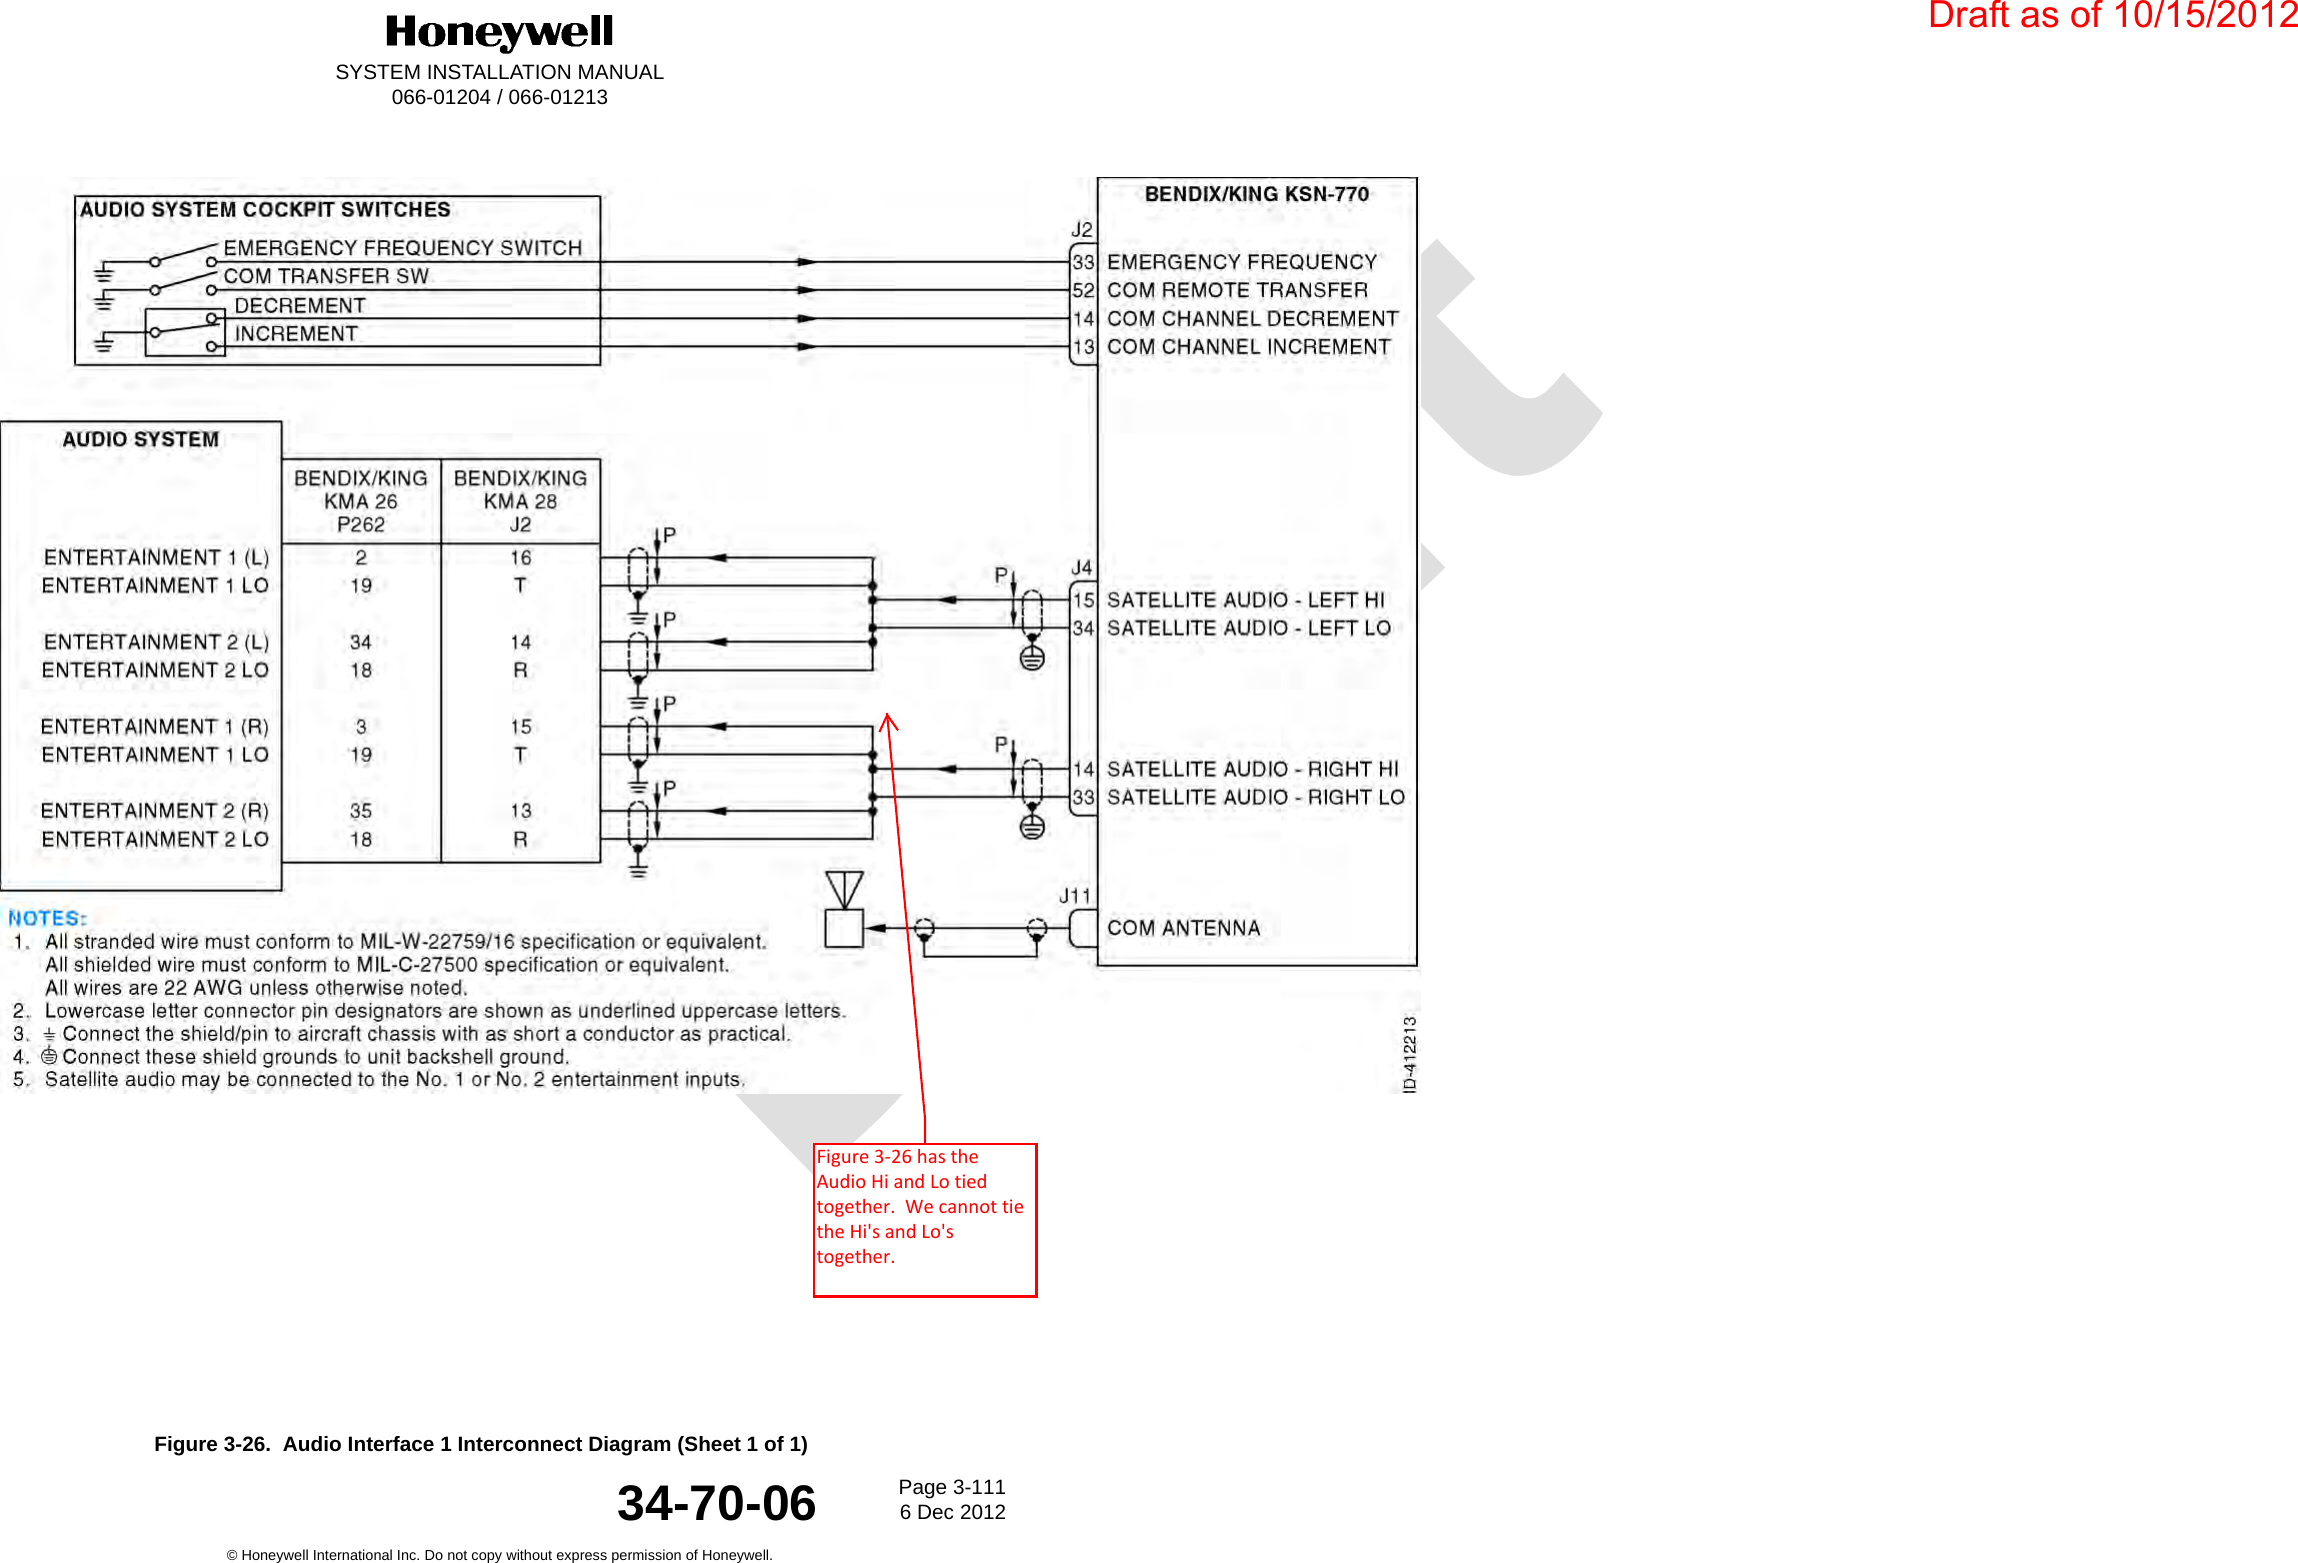 DraftSYSTEM INSTALLATION MANUAL066-01204 / 066-01213Page 3-1116 Dec 2012© Honeywell International Inc. Do not copy without express permission of Honeywell.34-70-06Figure 3-26.  Audio Interface 1 Interconnect Diagram (Sheet 1 of 1)Draft as of 10/15/2012Figure 3-26 has the Audio Hi and Lo tied together.  We cannot tie the Hi&apos;s and Lo&apos;s together. 